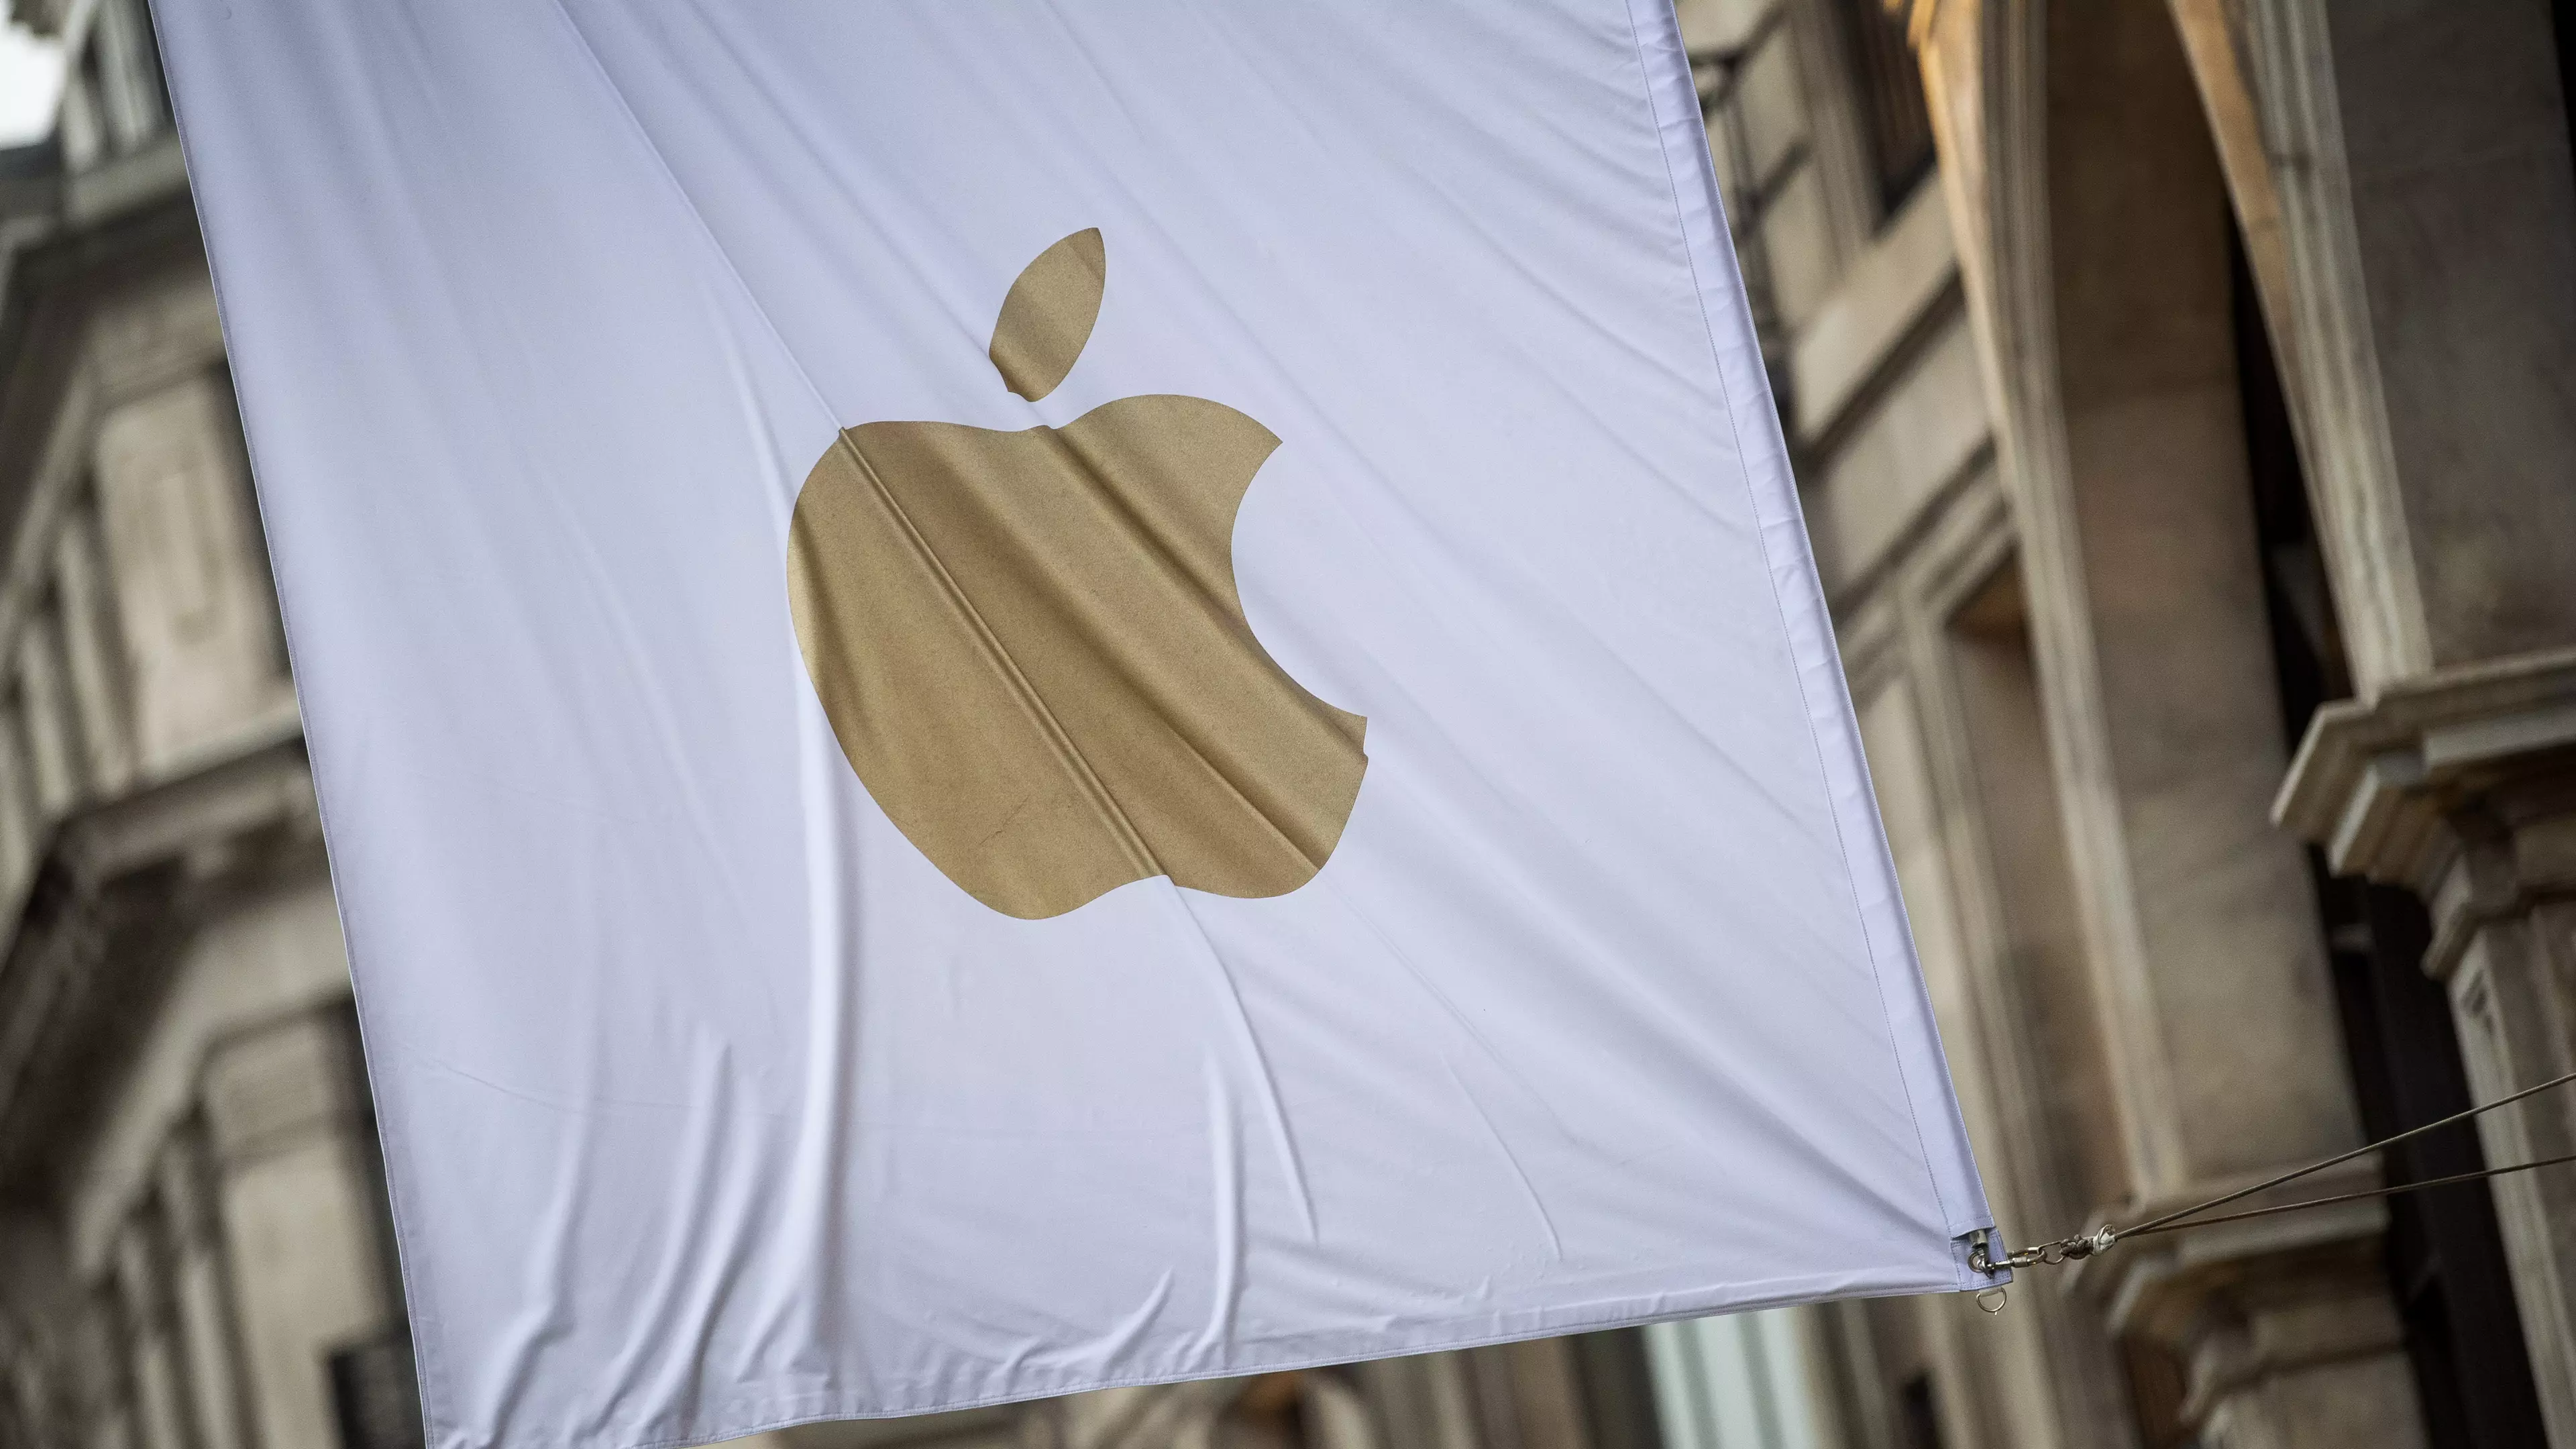 Apple Suffered The Biggest Financial Loss For Any Company In A Single Day Last Week